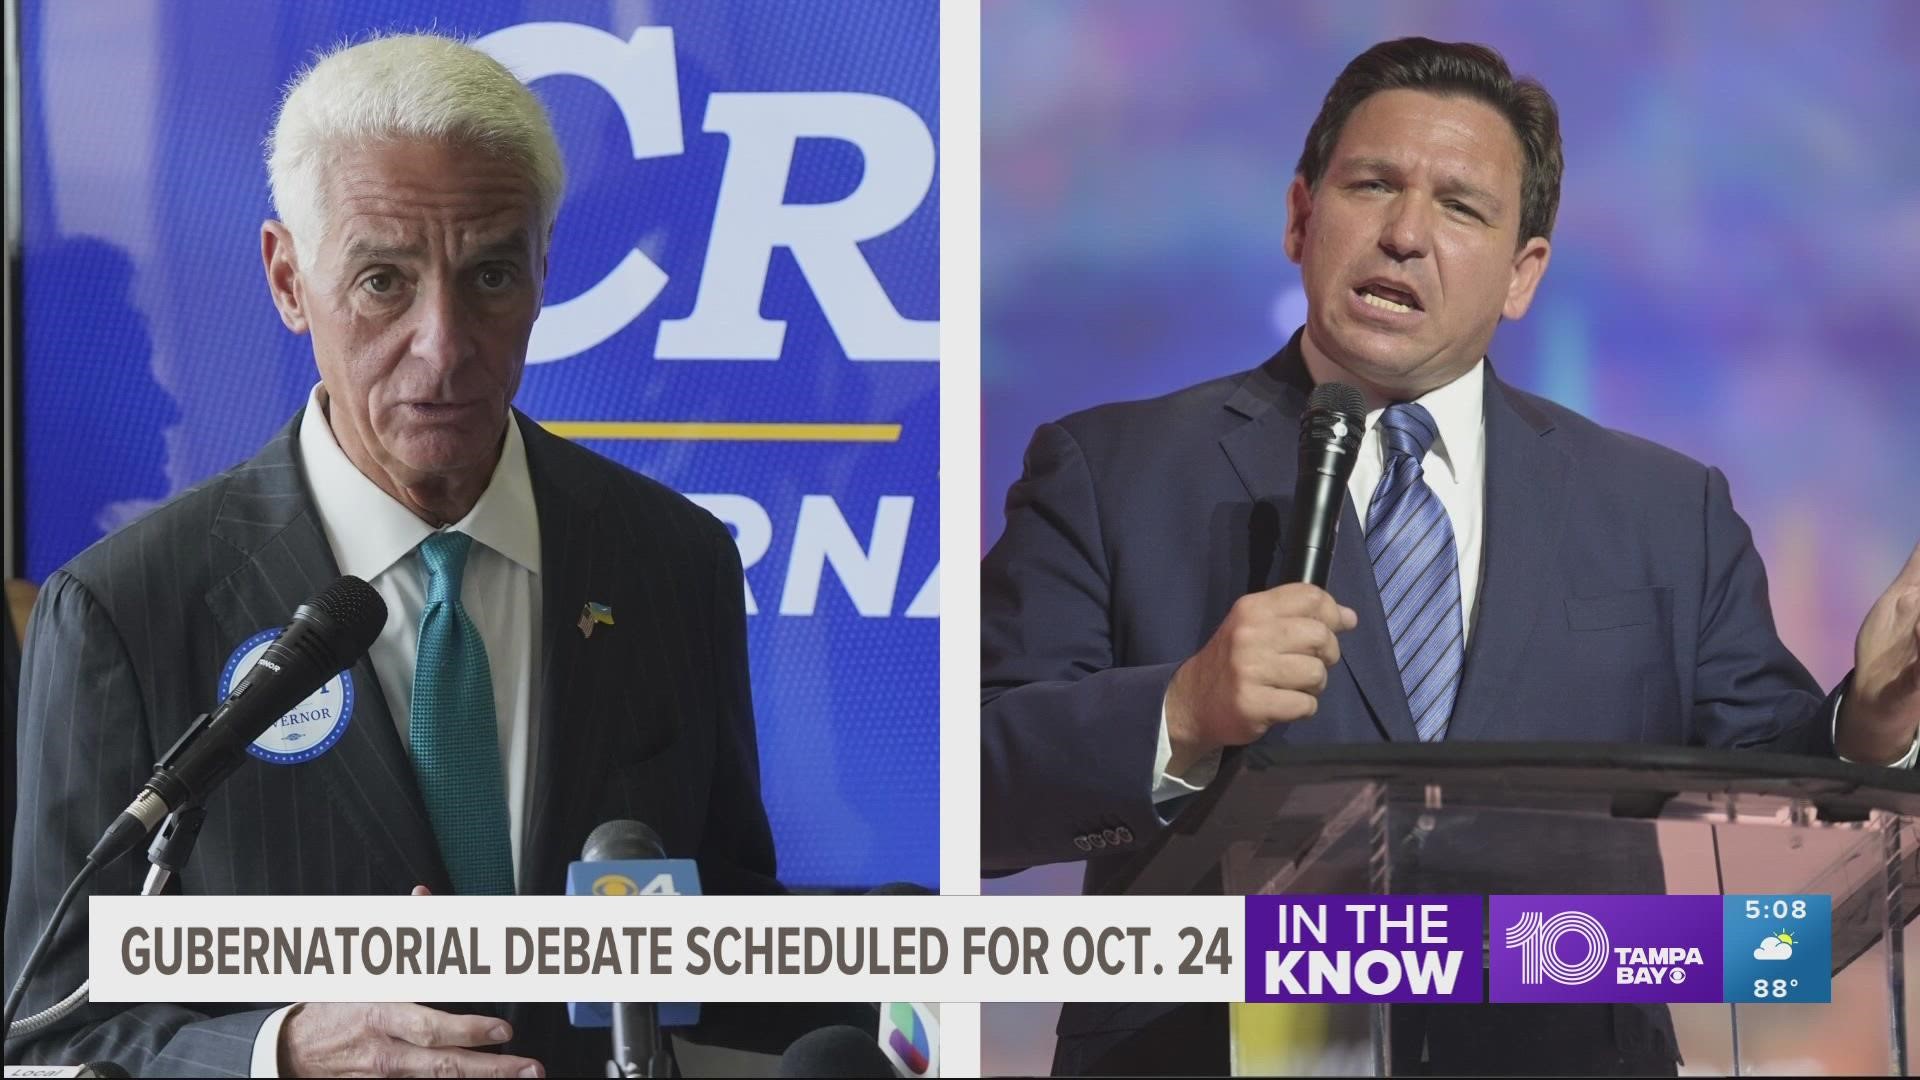 It's the only scheduled debate between the gubernatorial candidates.